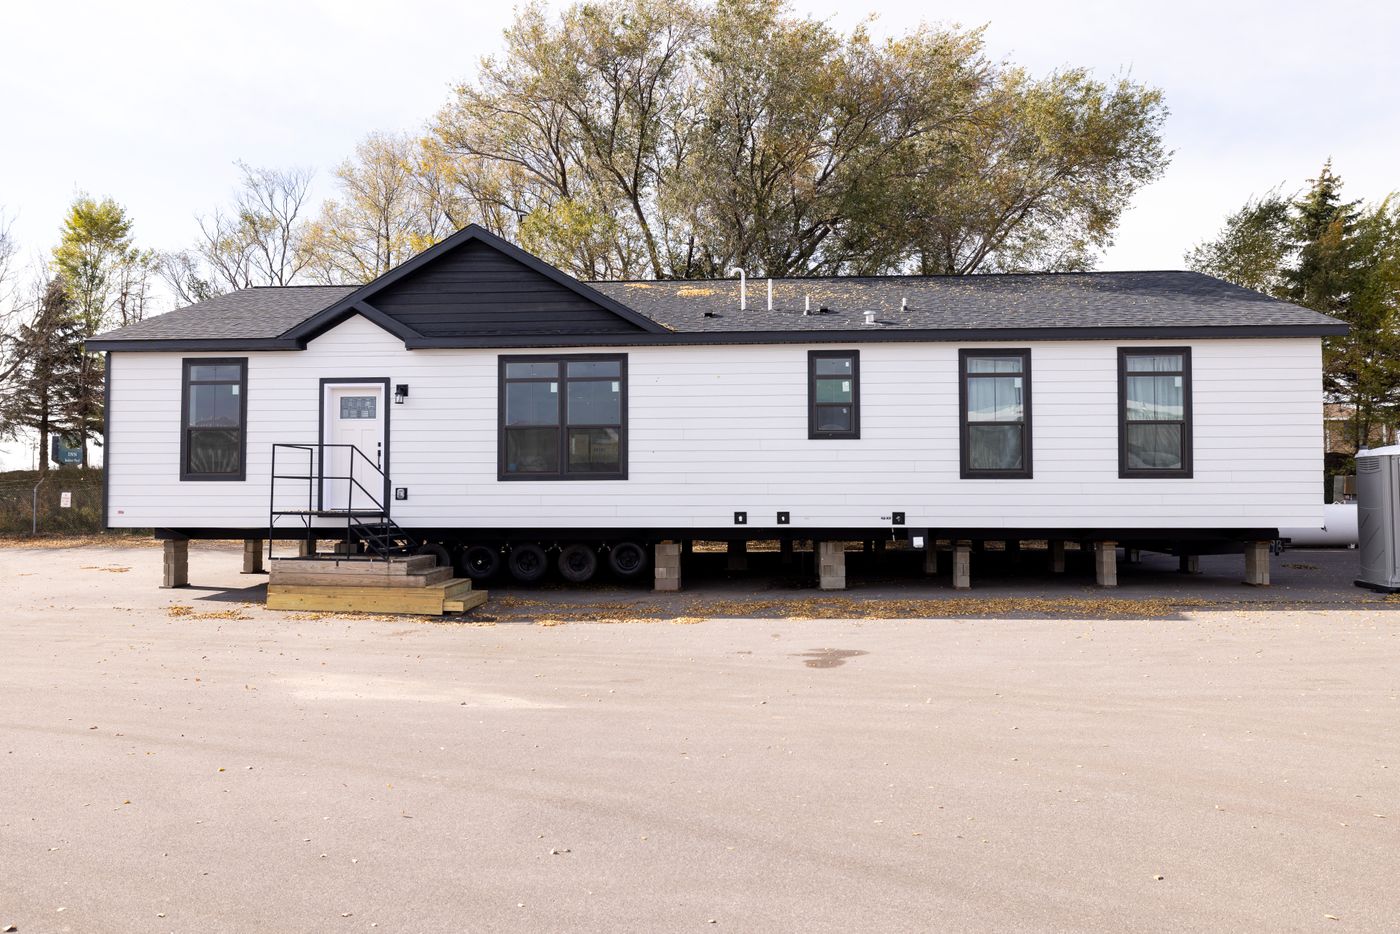 The 50TH ANNIVERSARY Exterior. This Manufactured Mobile Home features 3 bedrooms and 2 baths.